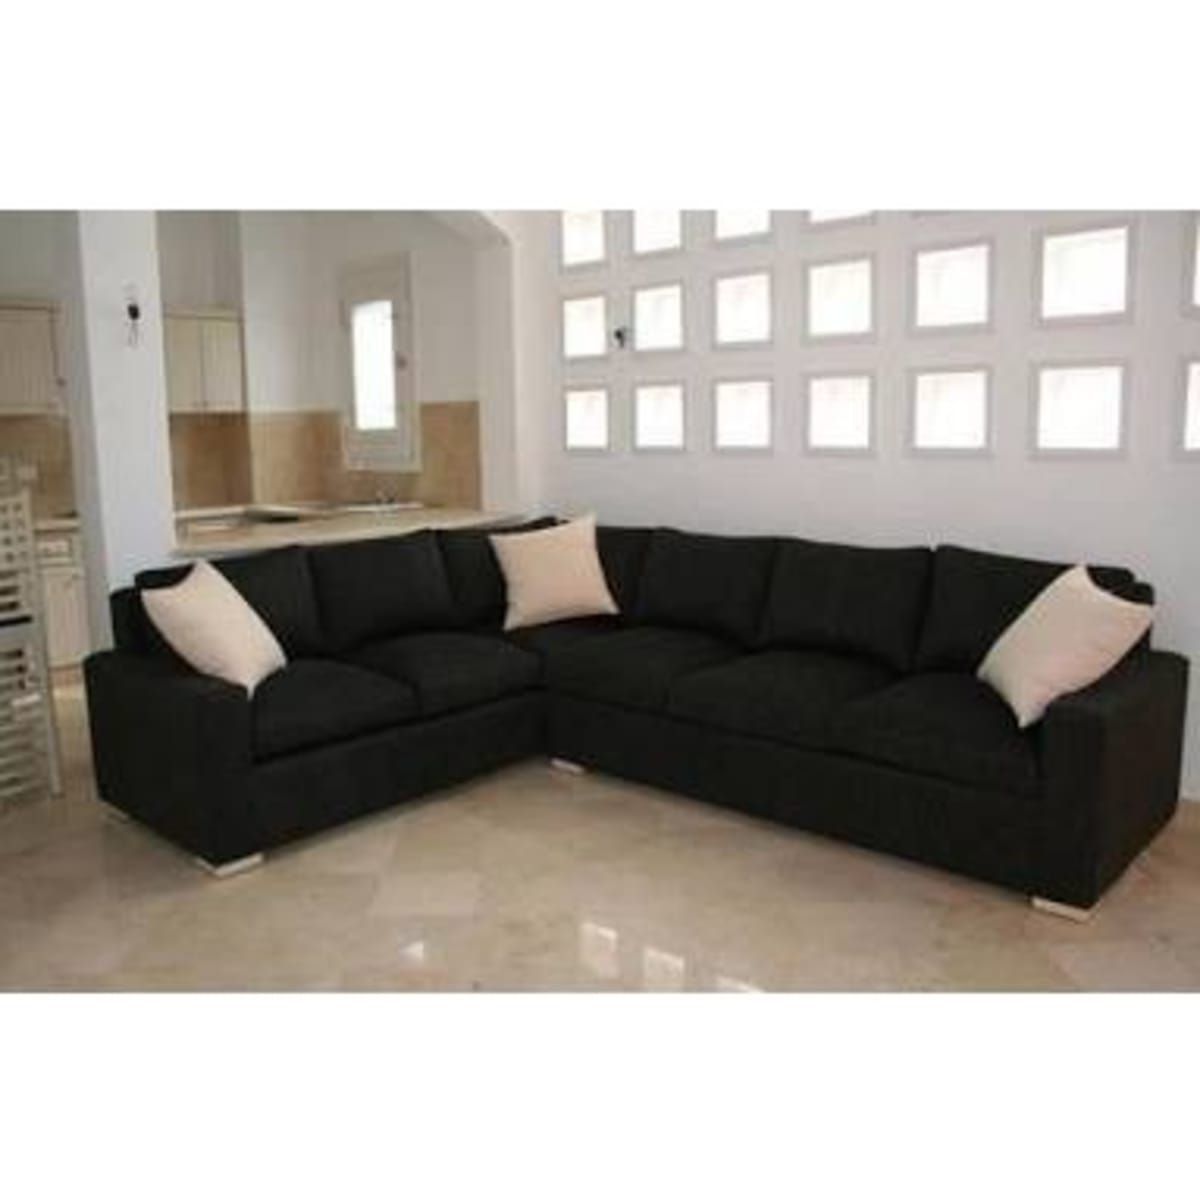 Black Fabric 6 Seater Sectional Sofa With 3 Free Throw Pillows | Konga  Online Shopping In 6 Seater Sectional Couches (View 15 of 20)